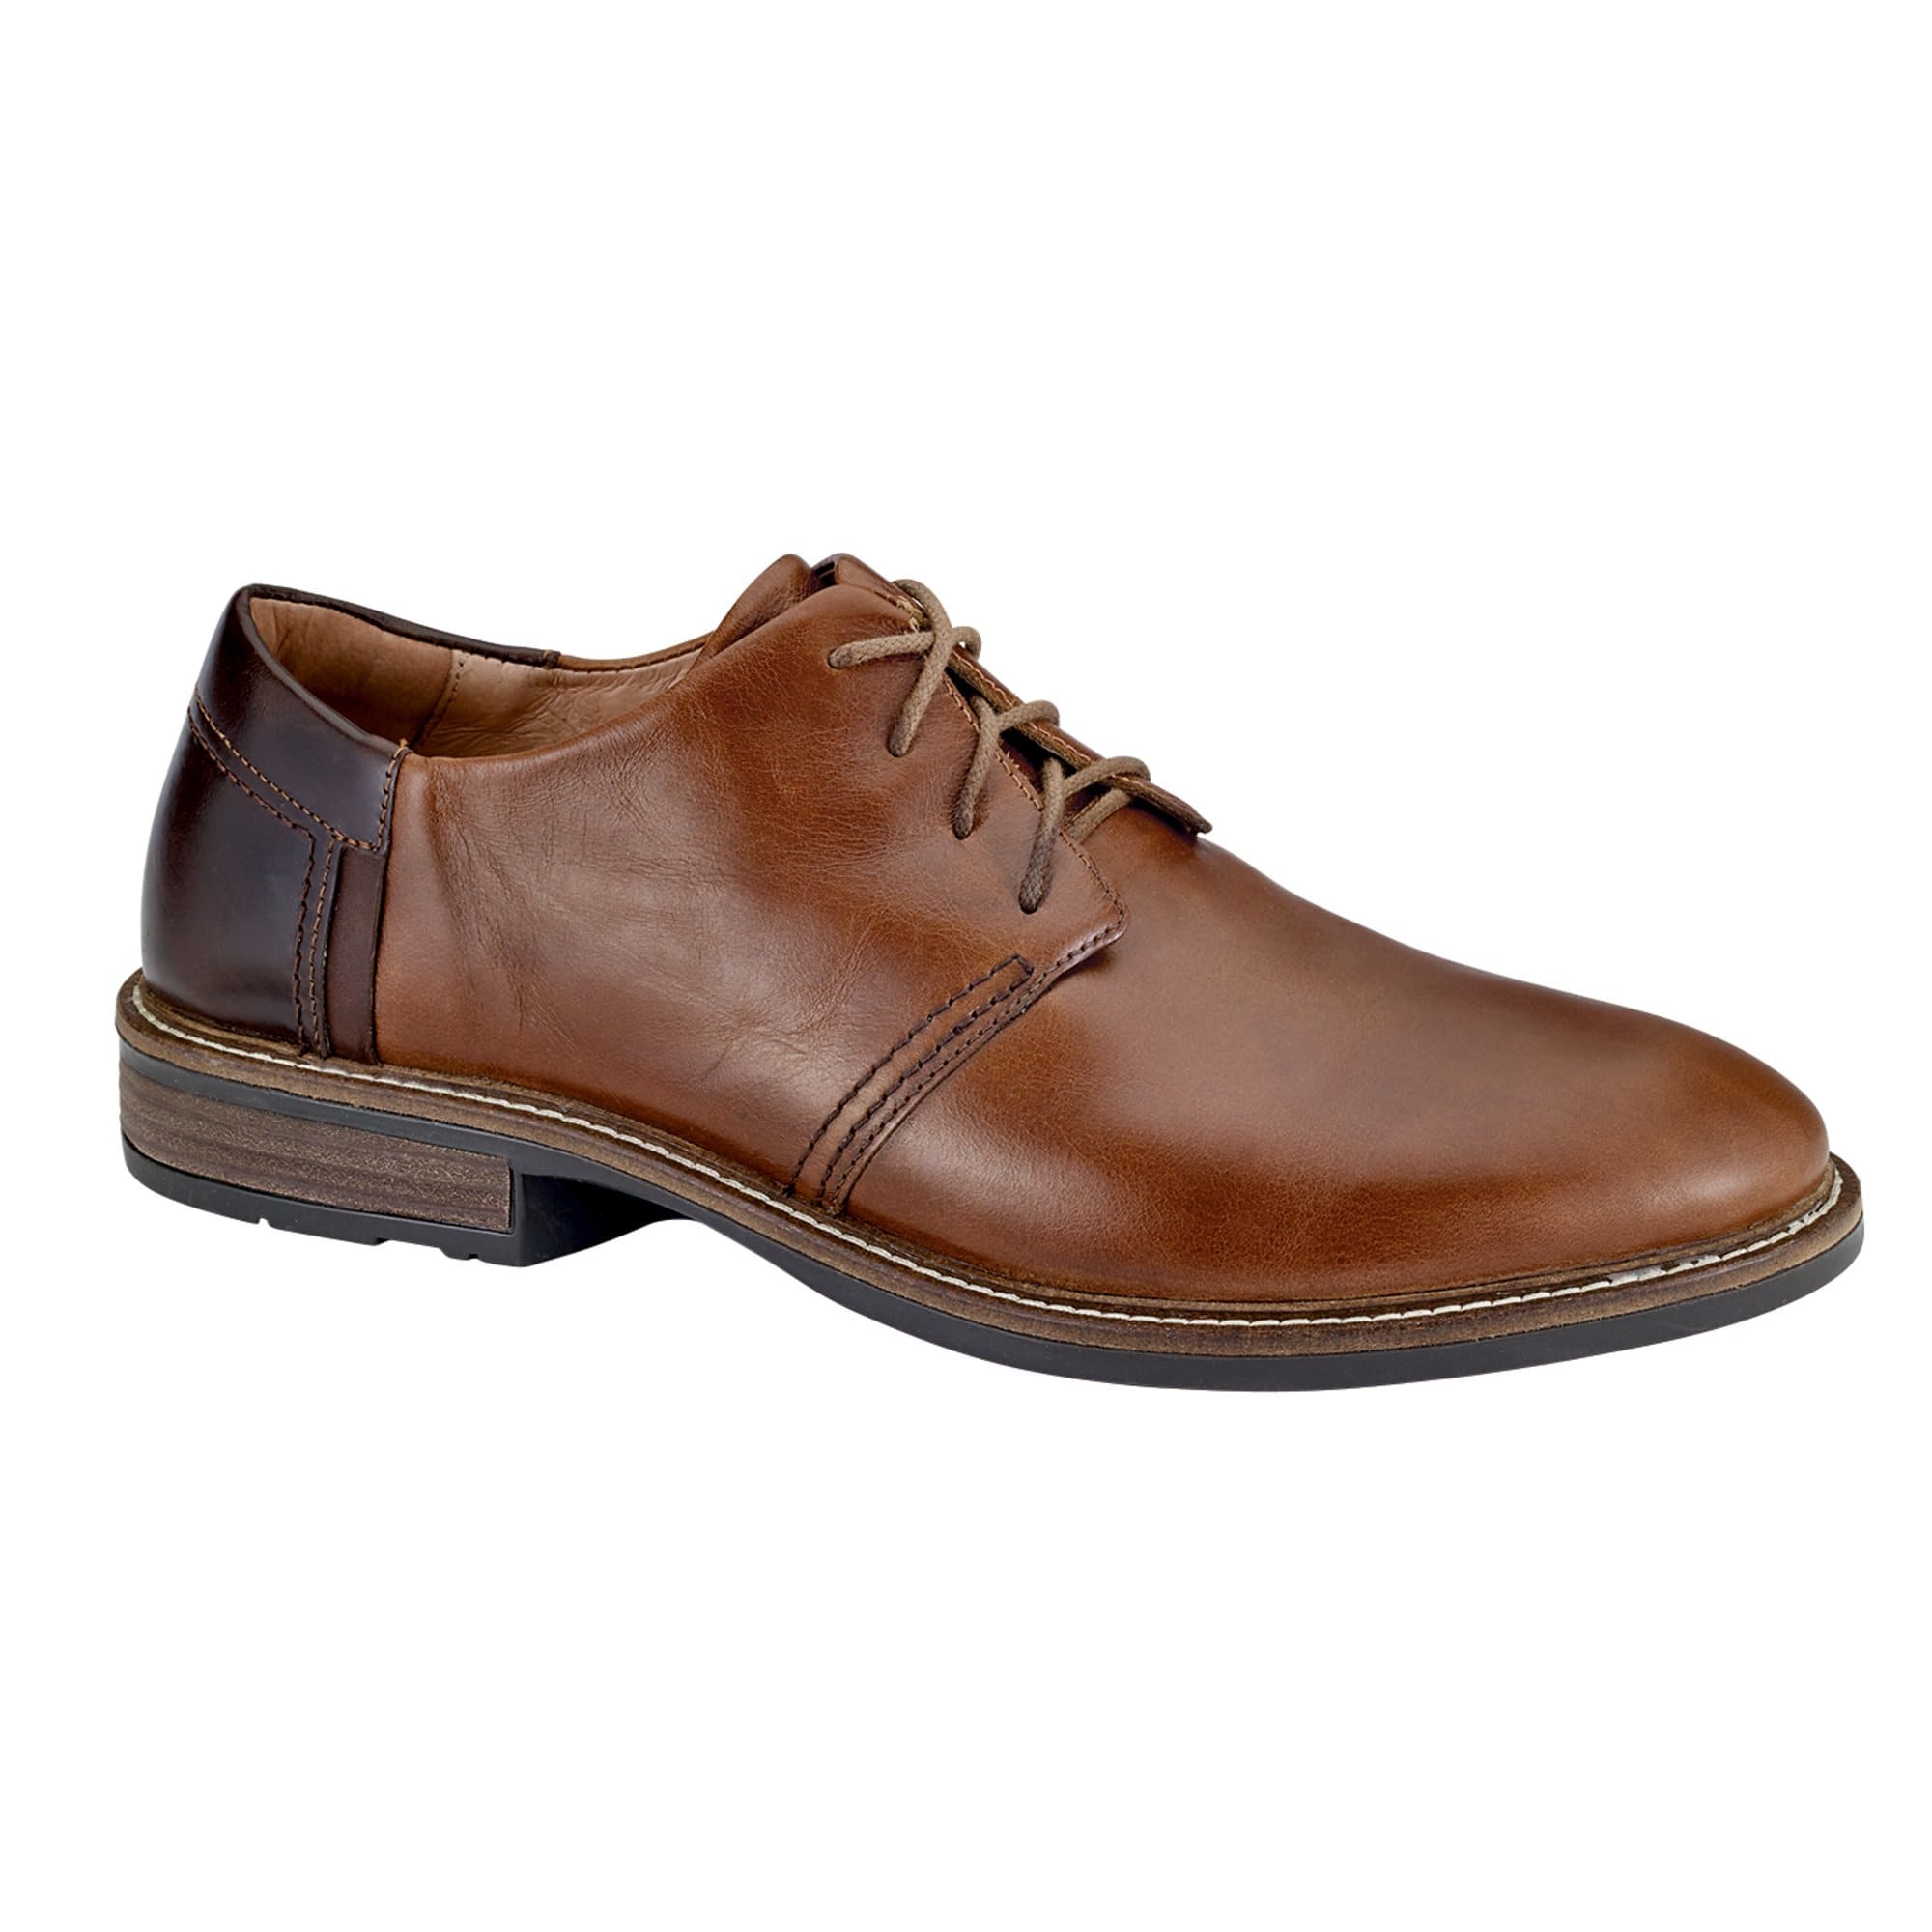 Naot Chief | Men's Nubuck Leather Classy Casual Oxford | Simons Shoes